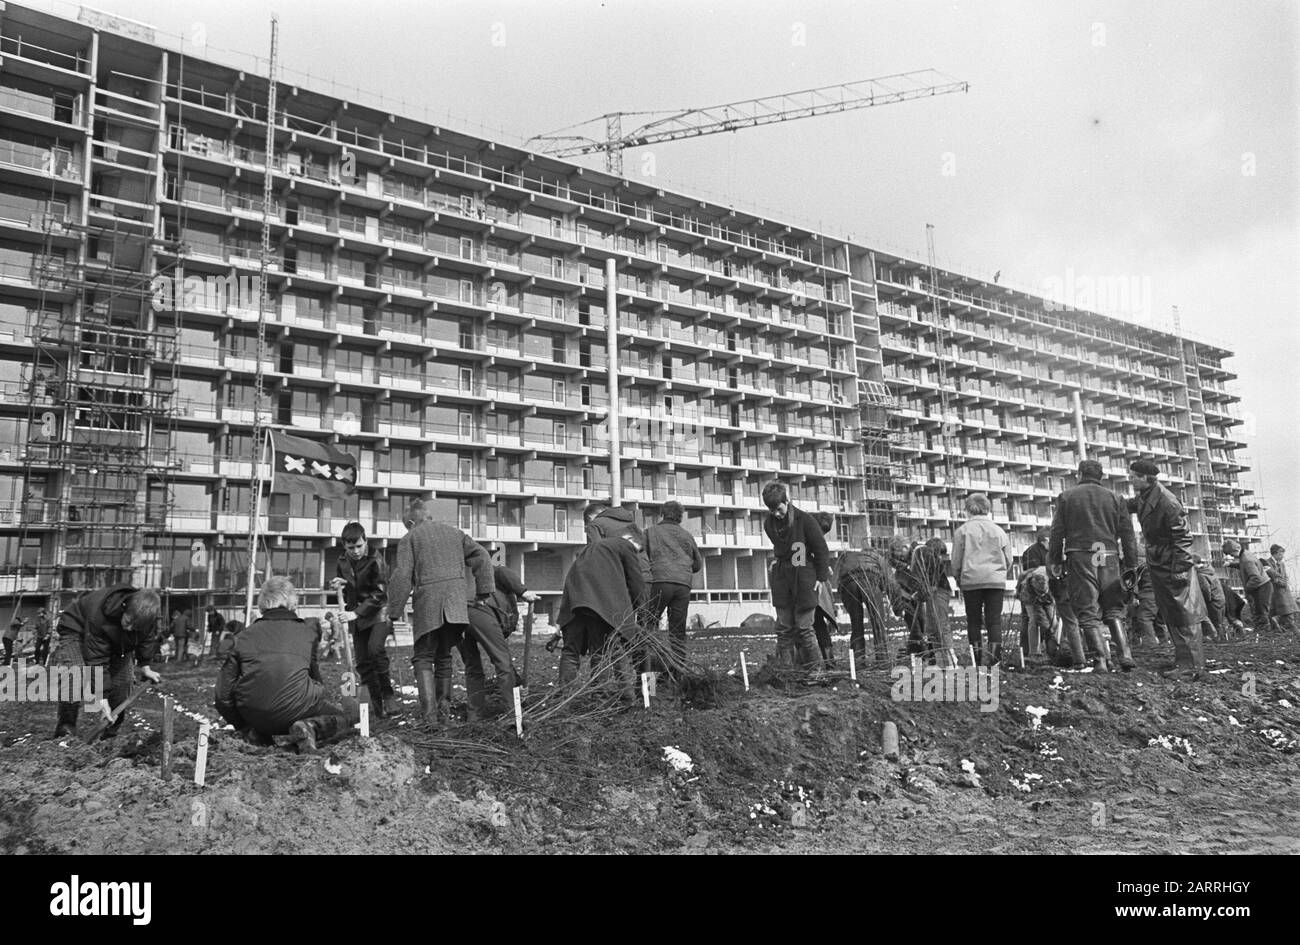 Schools plant trees in Bijlmermeer. Alderman Carriage helps a hand Date: April 3, 1968 Keywords: TREES, PLANTS, Schools Personal name: Carriage, P.J. Stock Photo